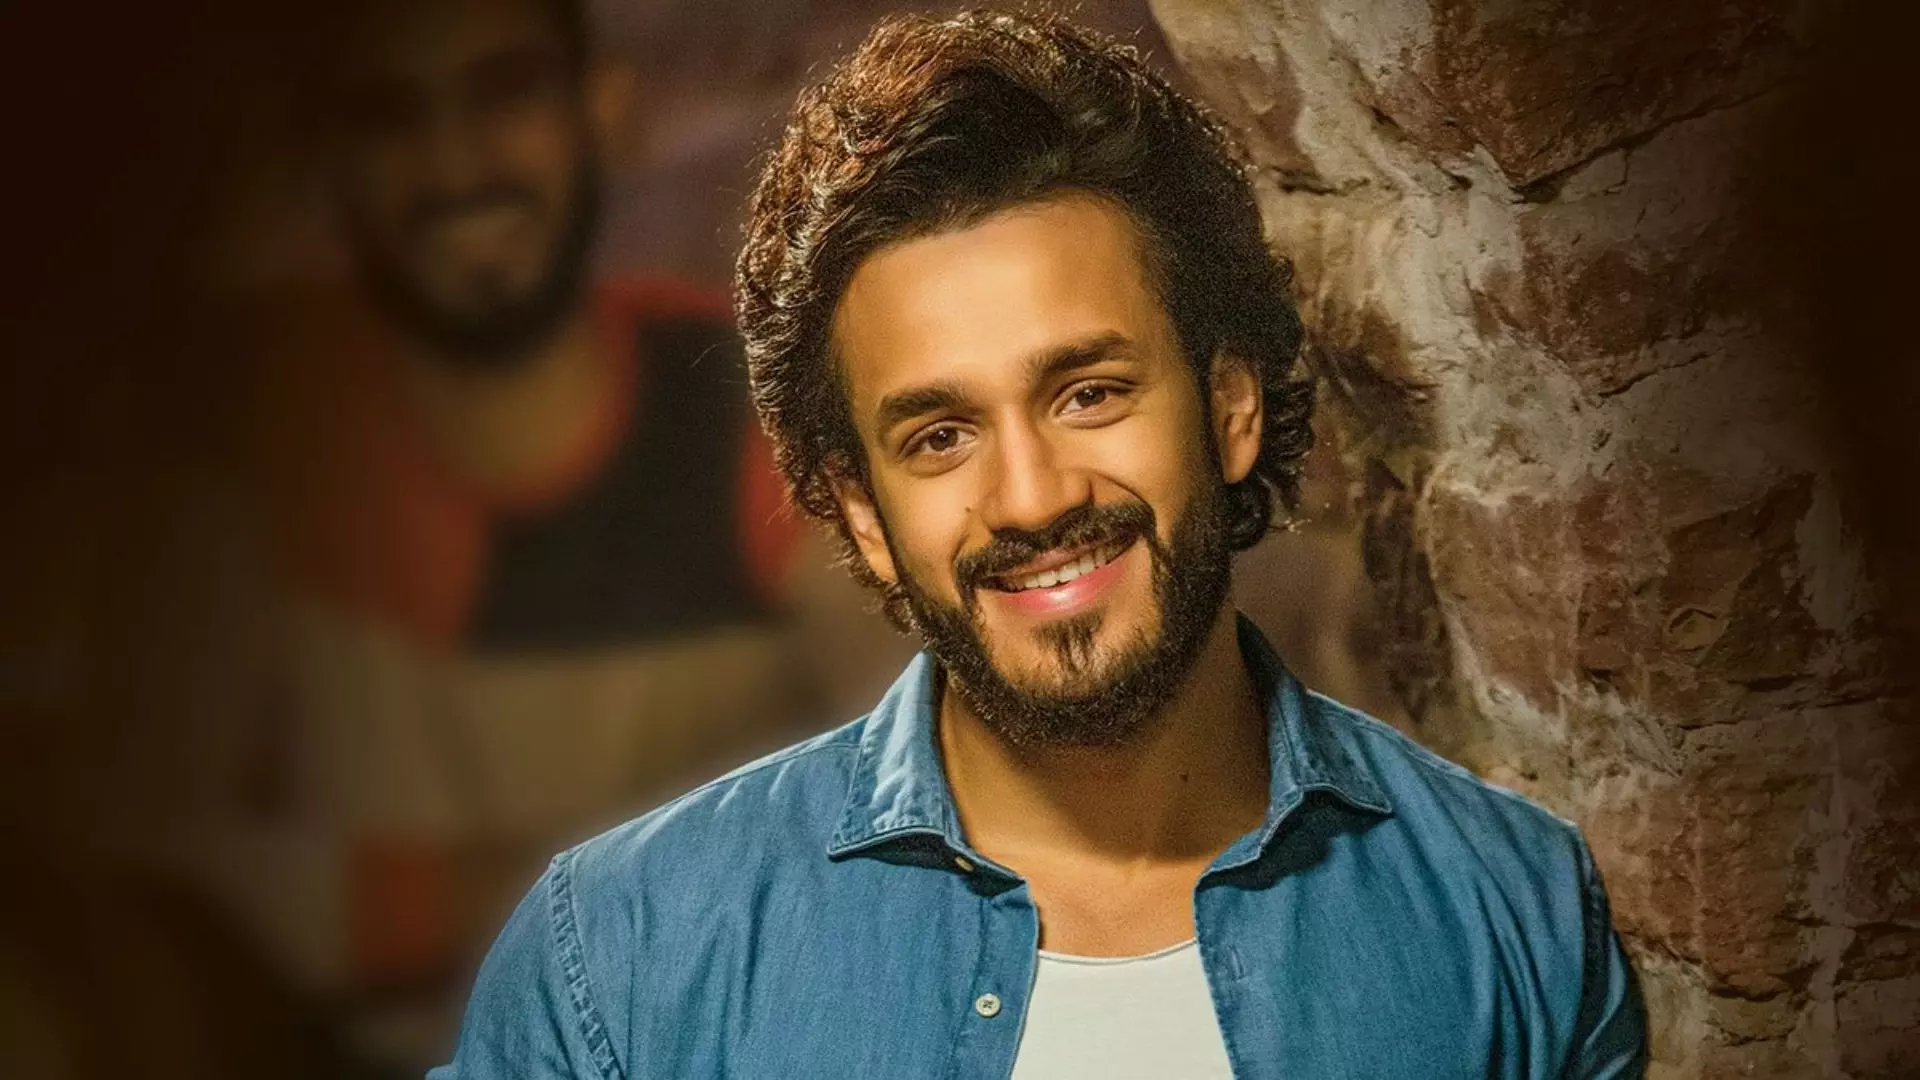 Akkineni Akhil Says My Total Focus is on My Movies and Carrer Only